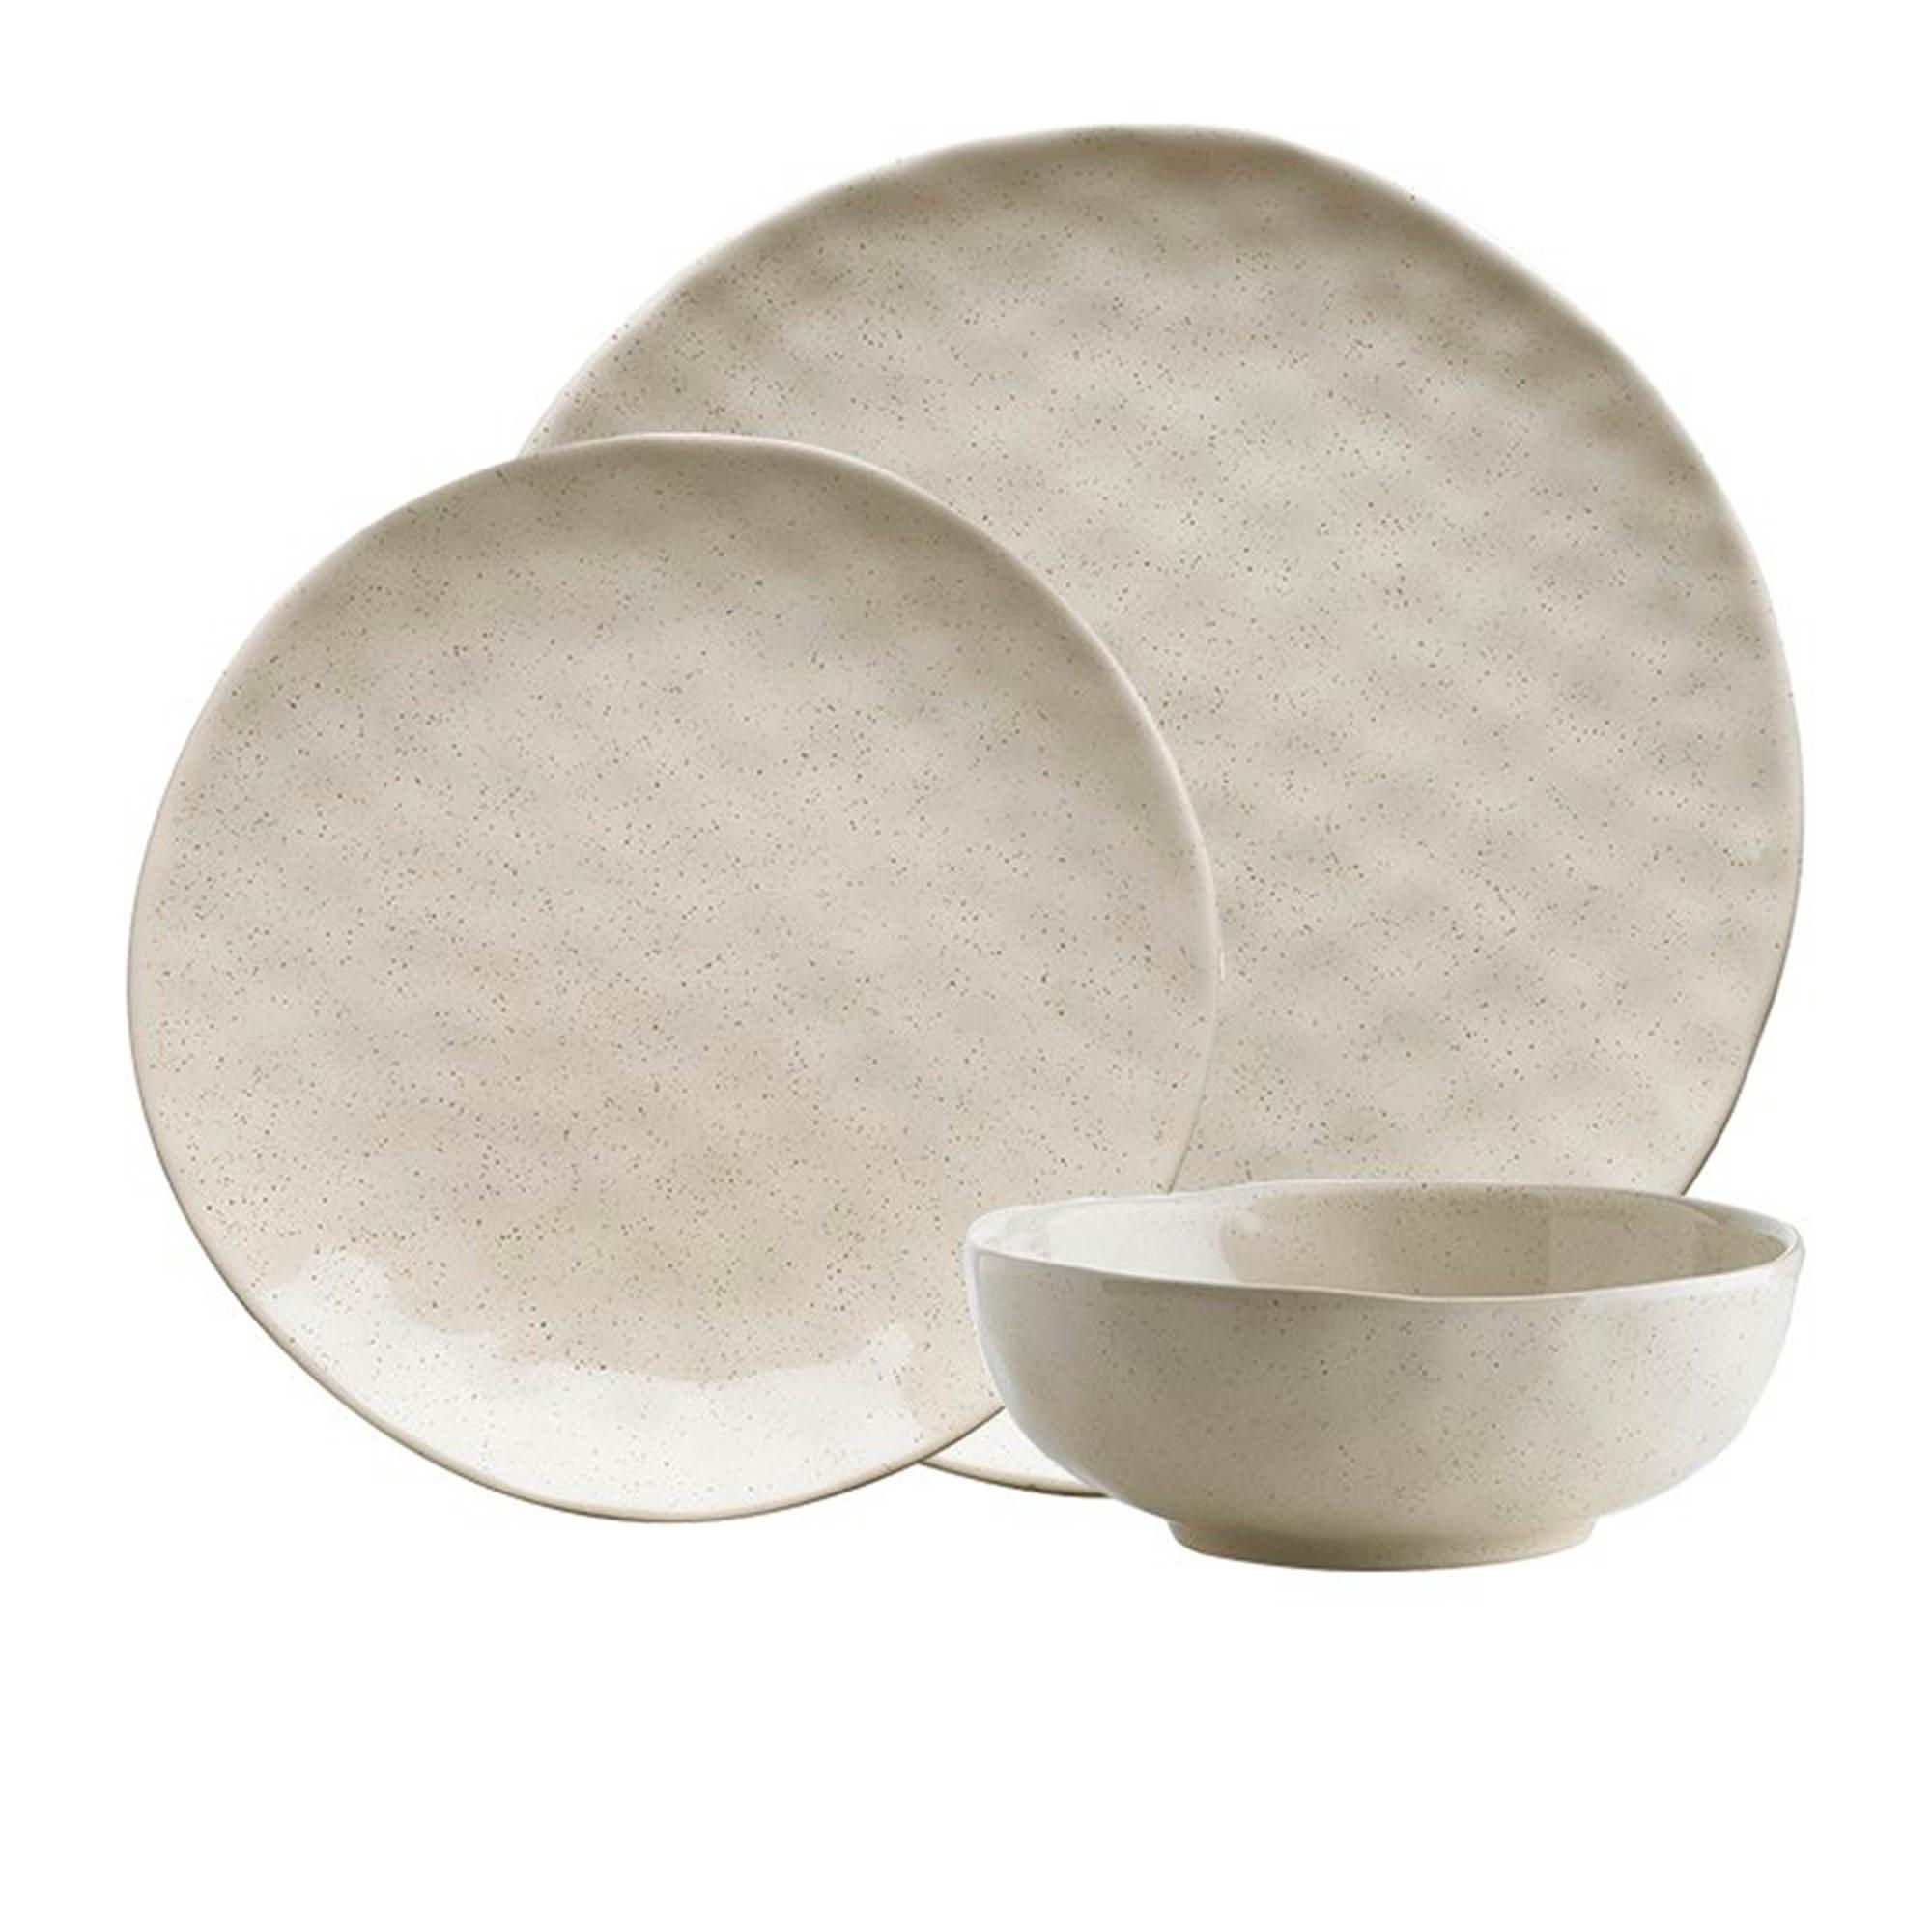 Ecology Speckle Dinner Set 12pc Oatmeal Image 1